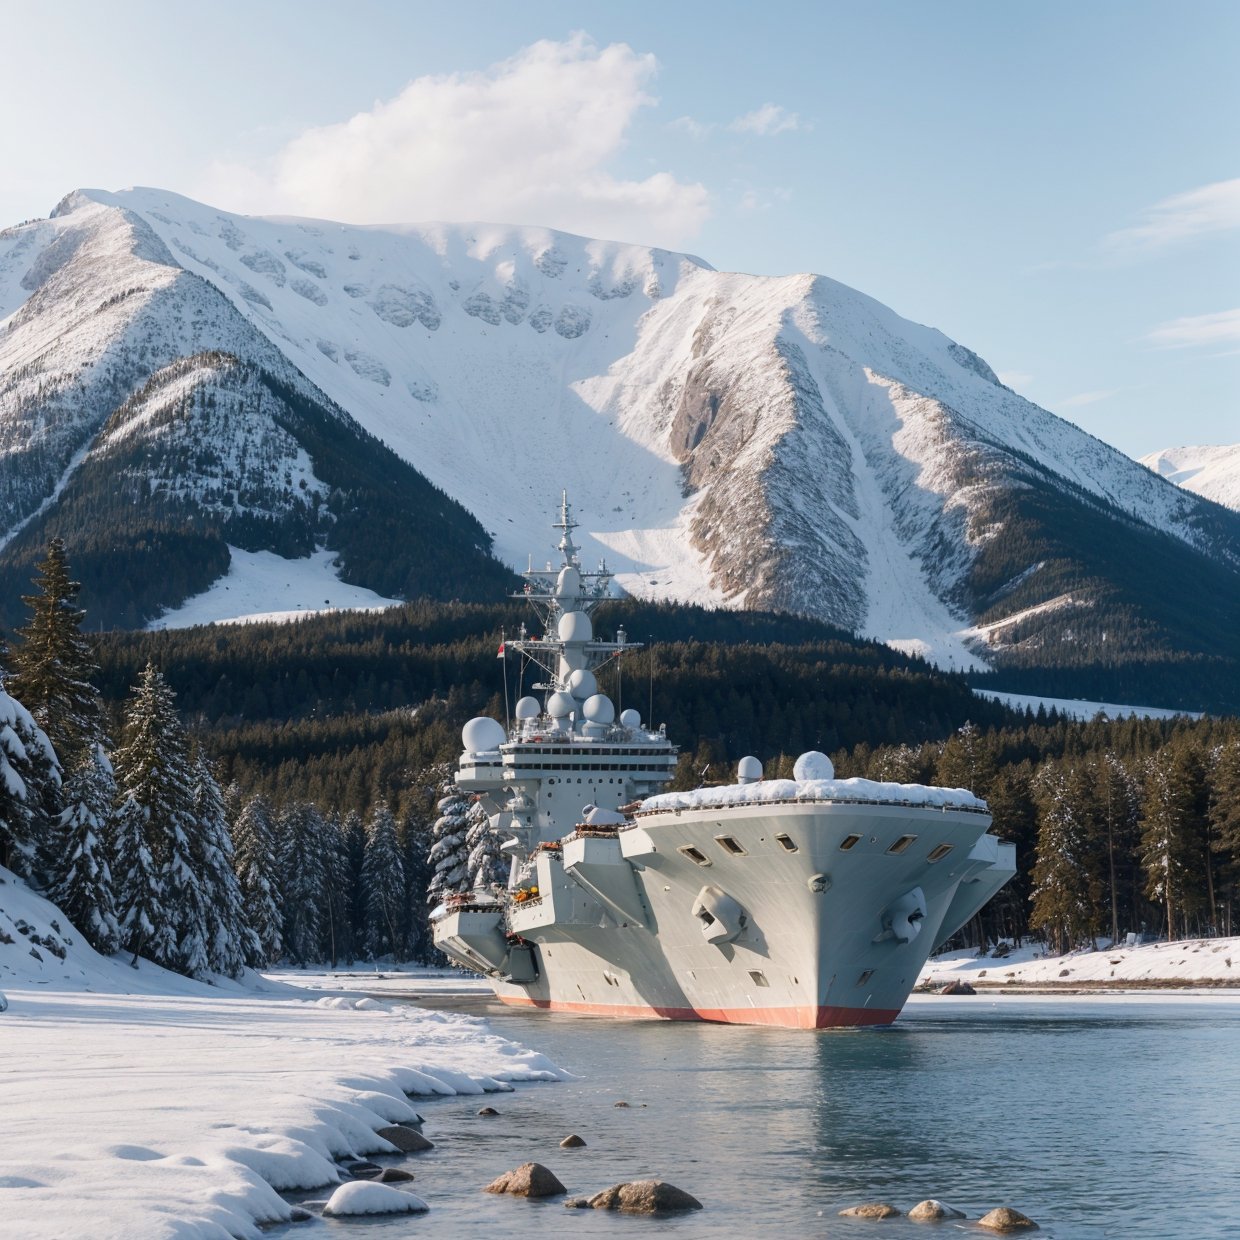 summer first snow sinking broken aircraft carrier on the shore of the bay coniferous forest snowy peaks many small details filigree professional photo HDR hyper detail realistic CGI high resolution quality precision clarity sharpness natural f/16 1/250s also 100mm К